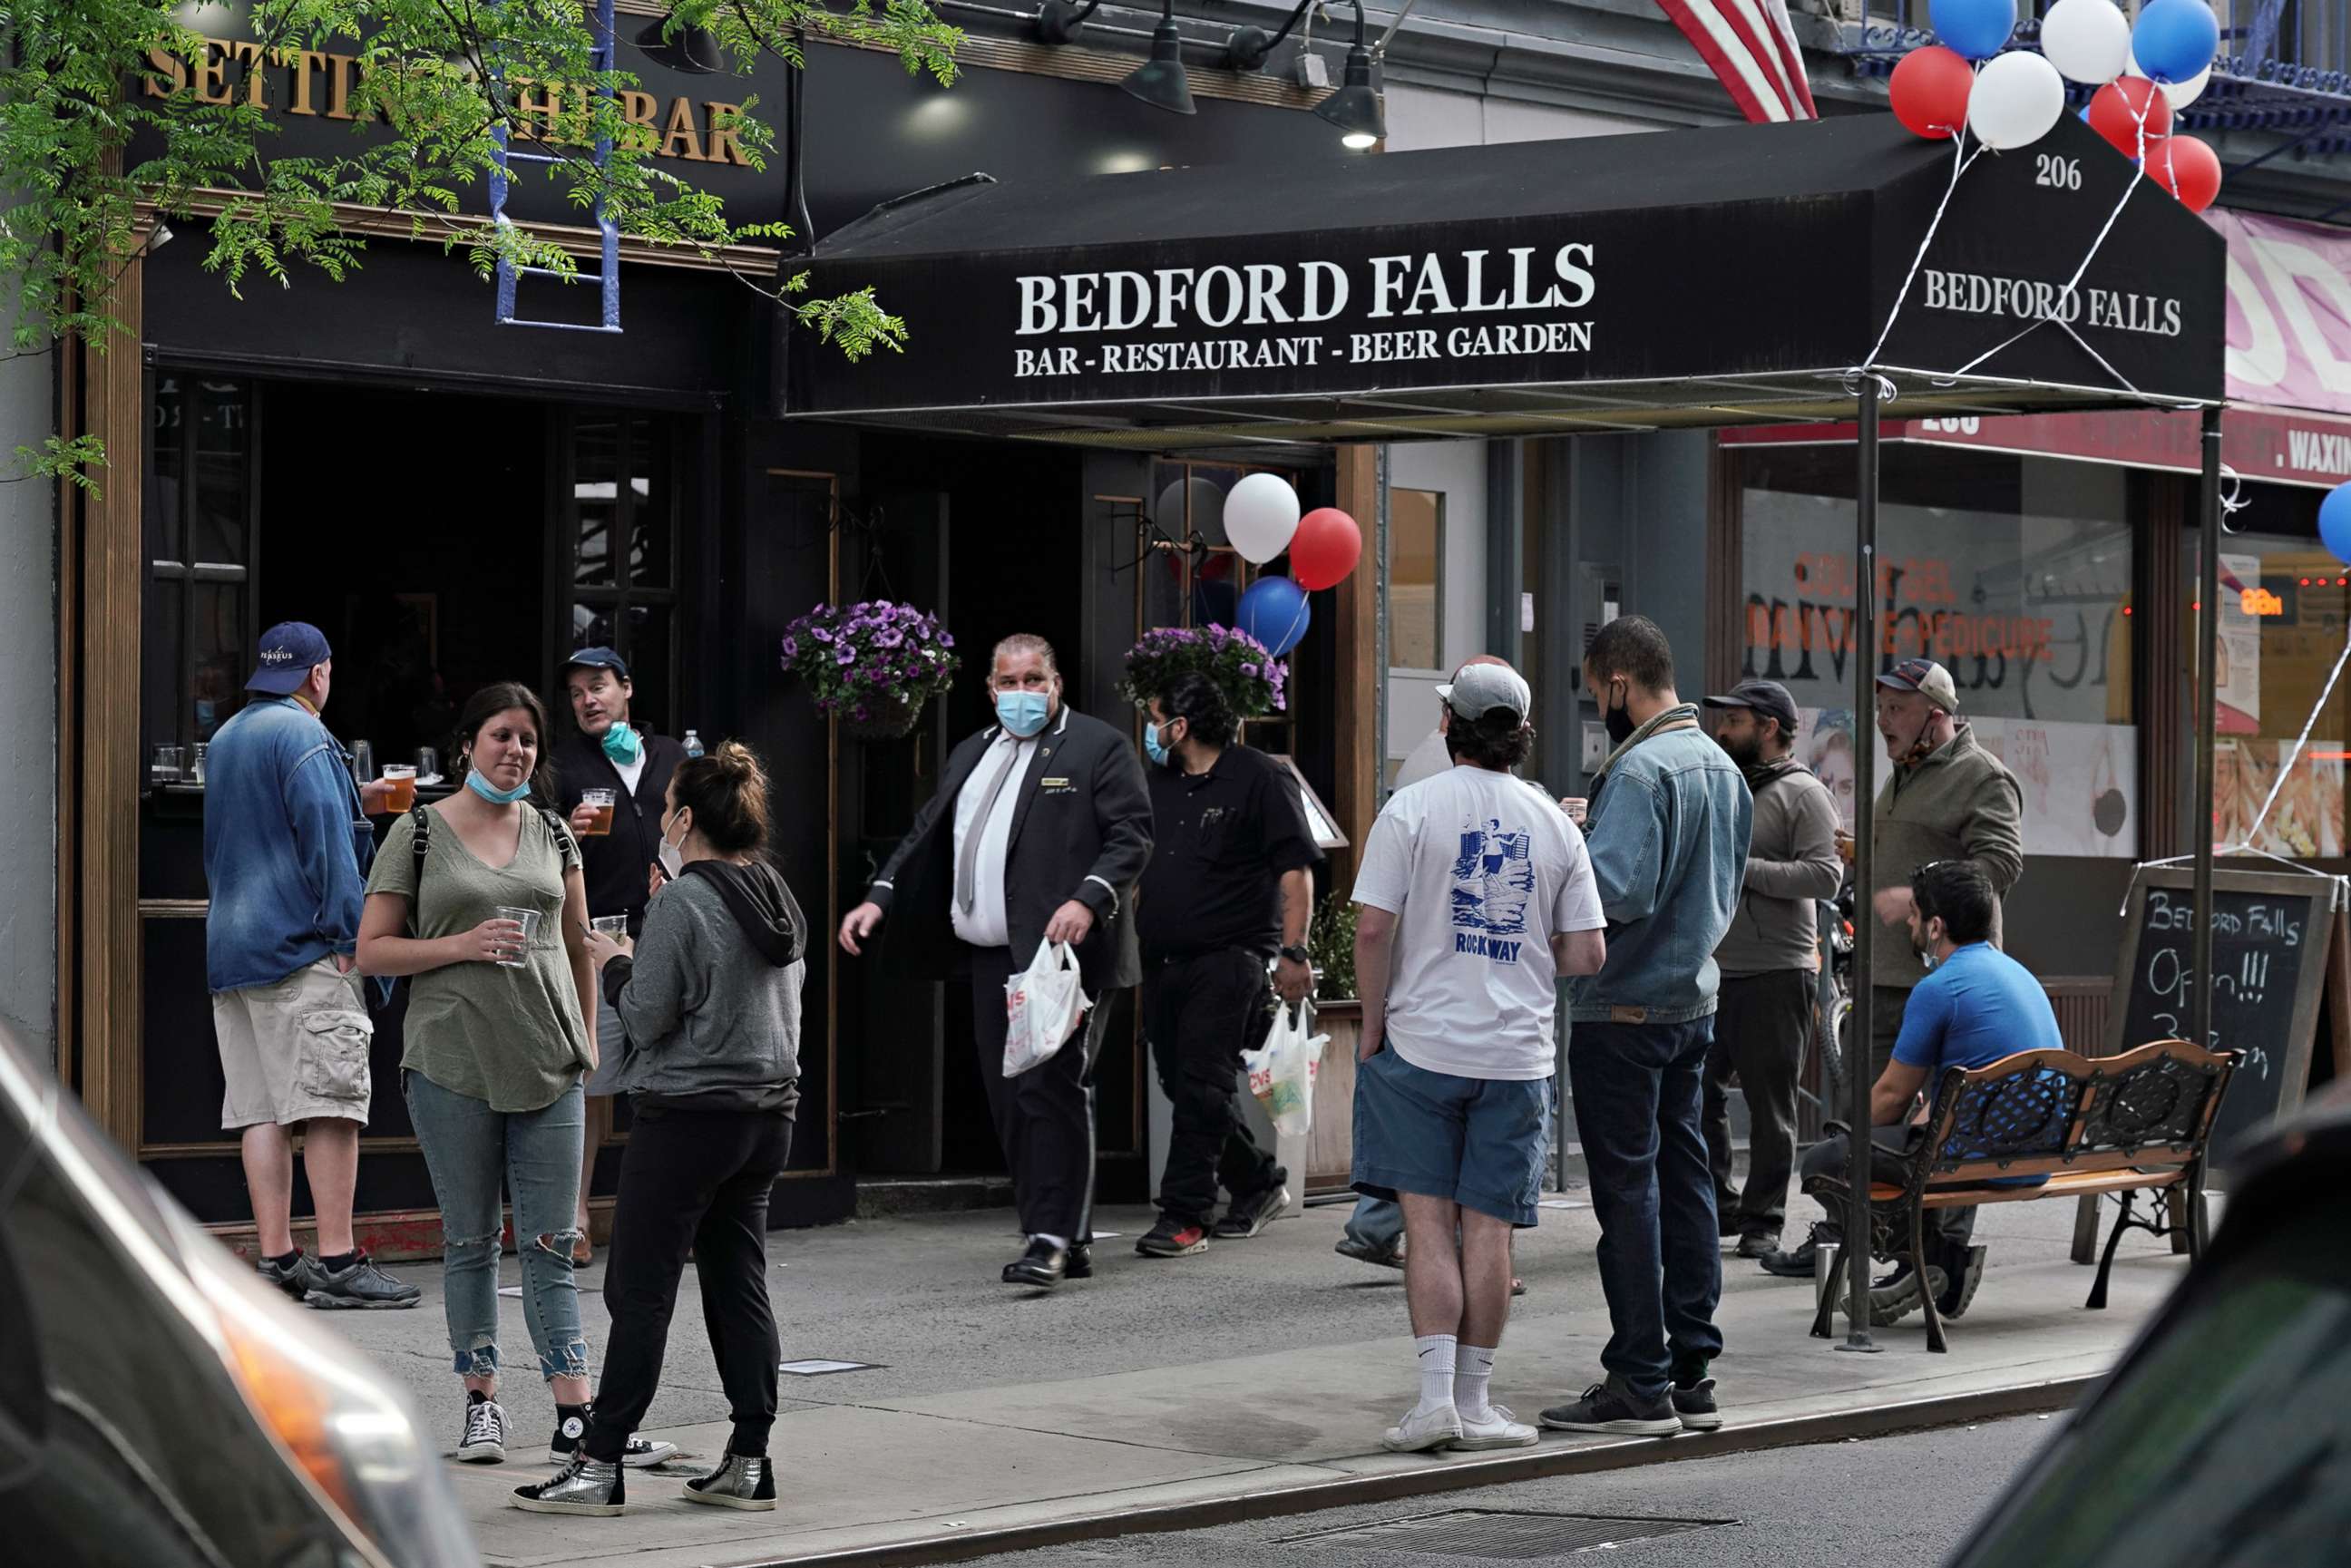 PHOTO: People gather outside a bar selling to-go drinks during the coronavirus pandemic on May 18, 2020 in New York City.